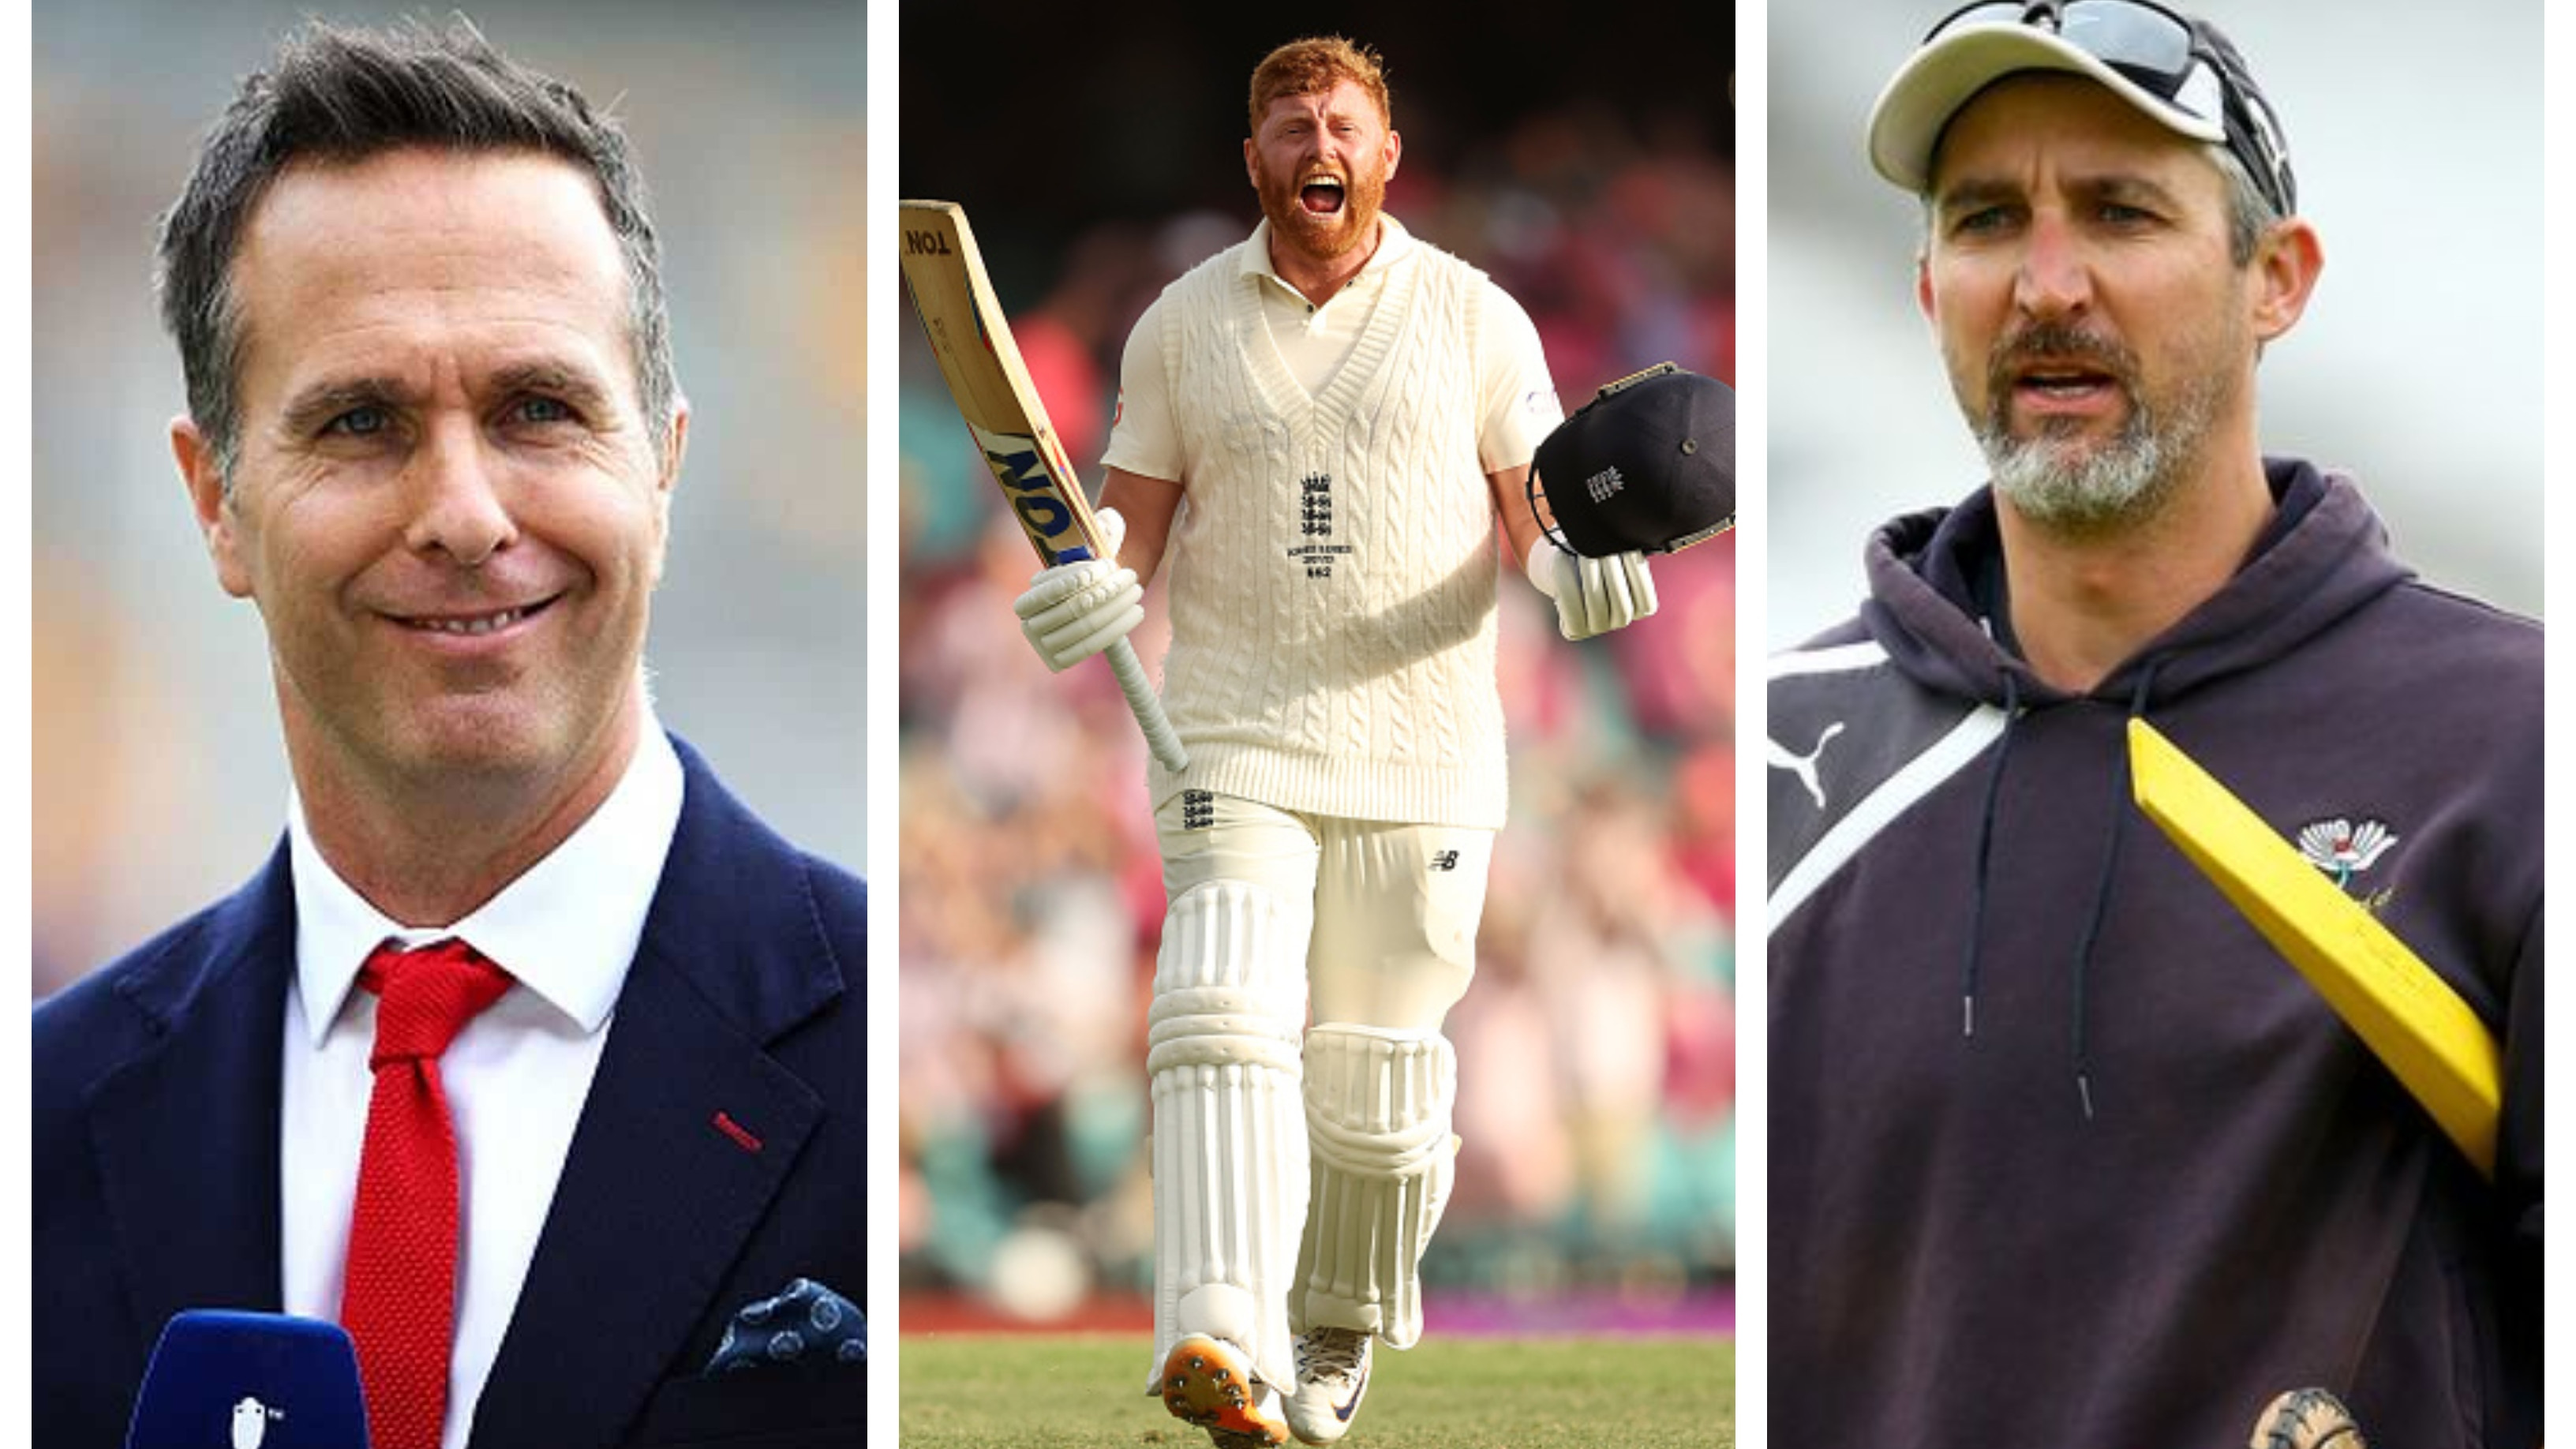 Ashes 2021-22: Cricket fraternity lauds Jonny Bairstow for his superb century after top-order collapse at SCG